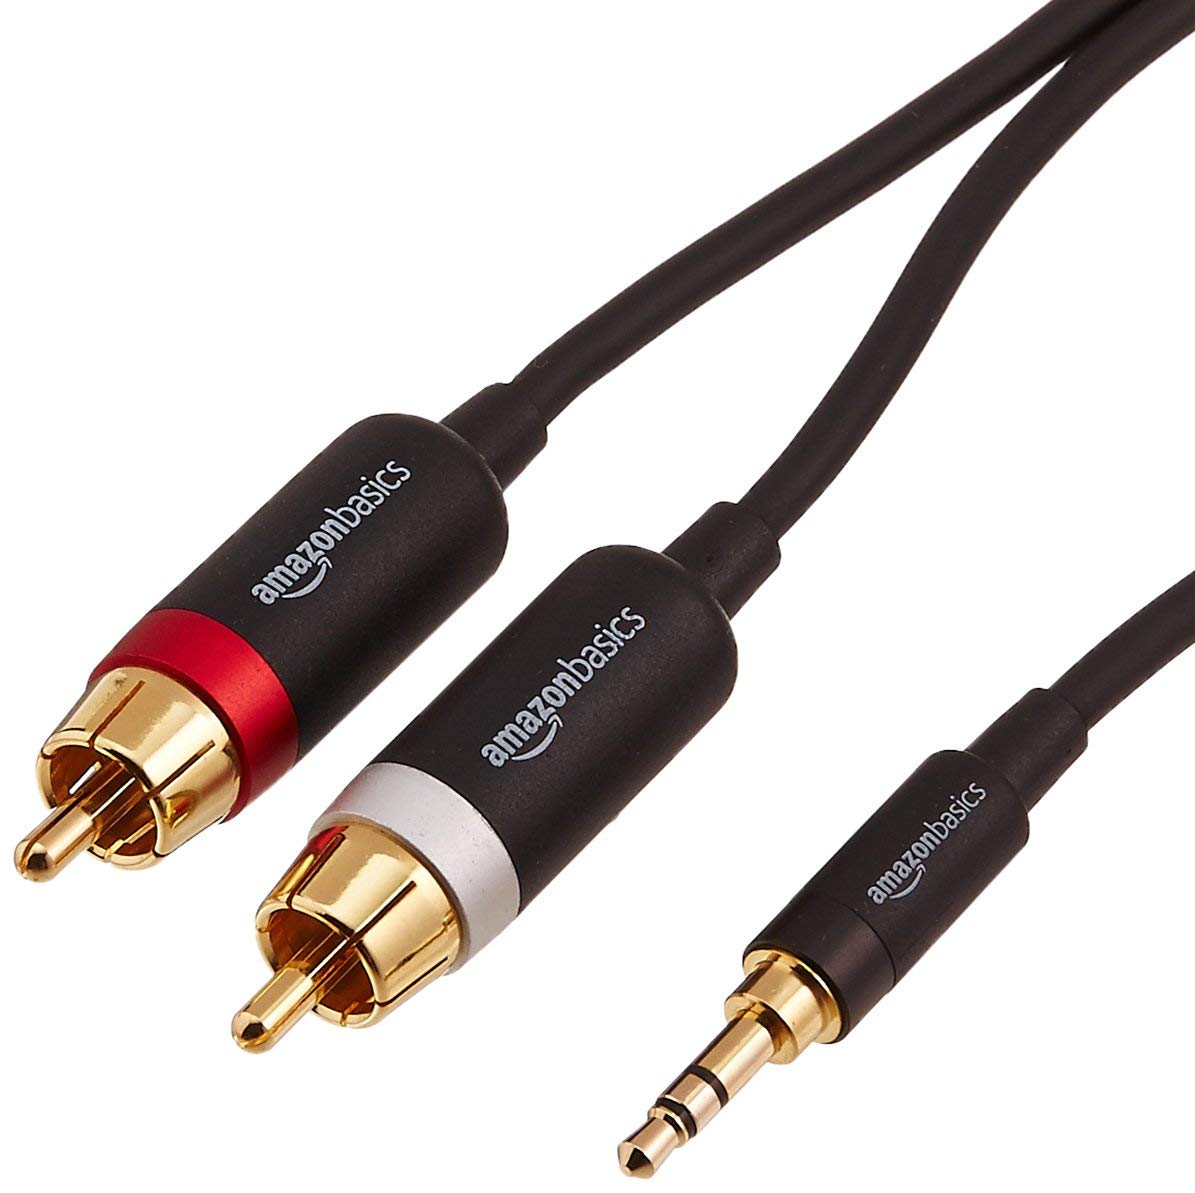 Amazon Basics 3.5mm to 2-Male RCA Adapter Audio Stereo Cable For Speaker, 25 Feet